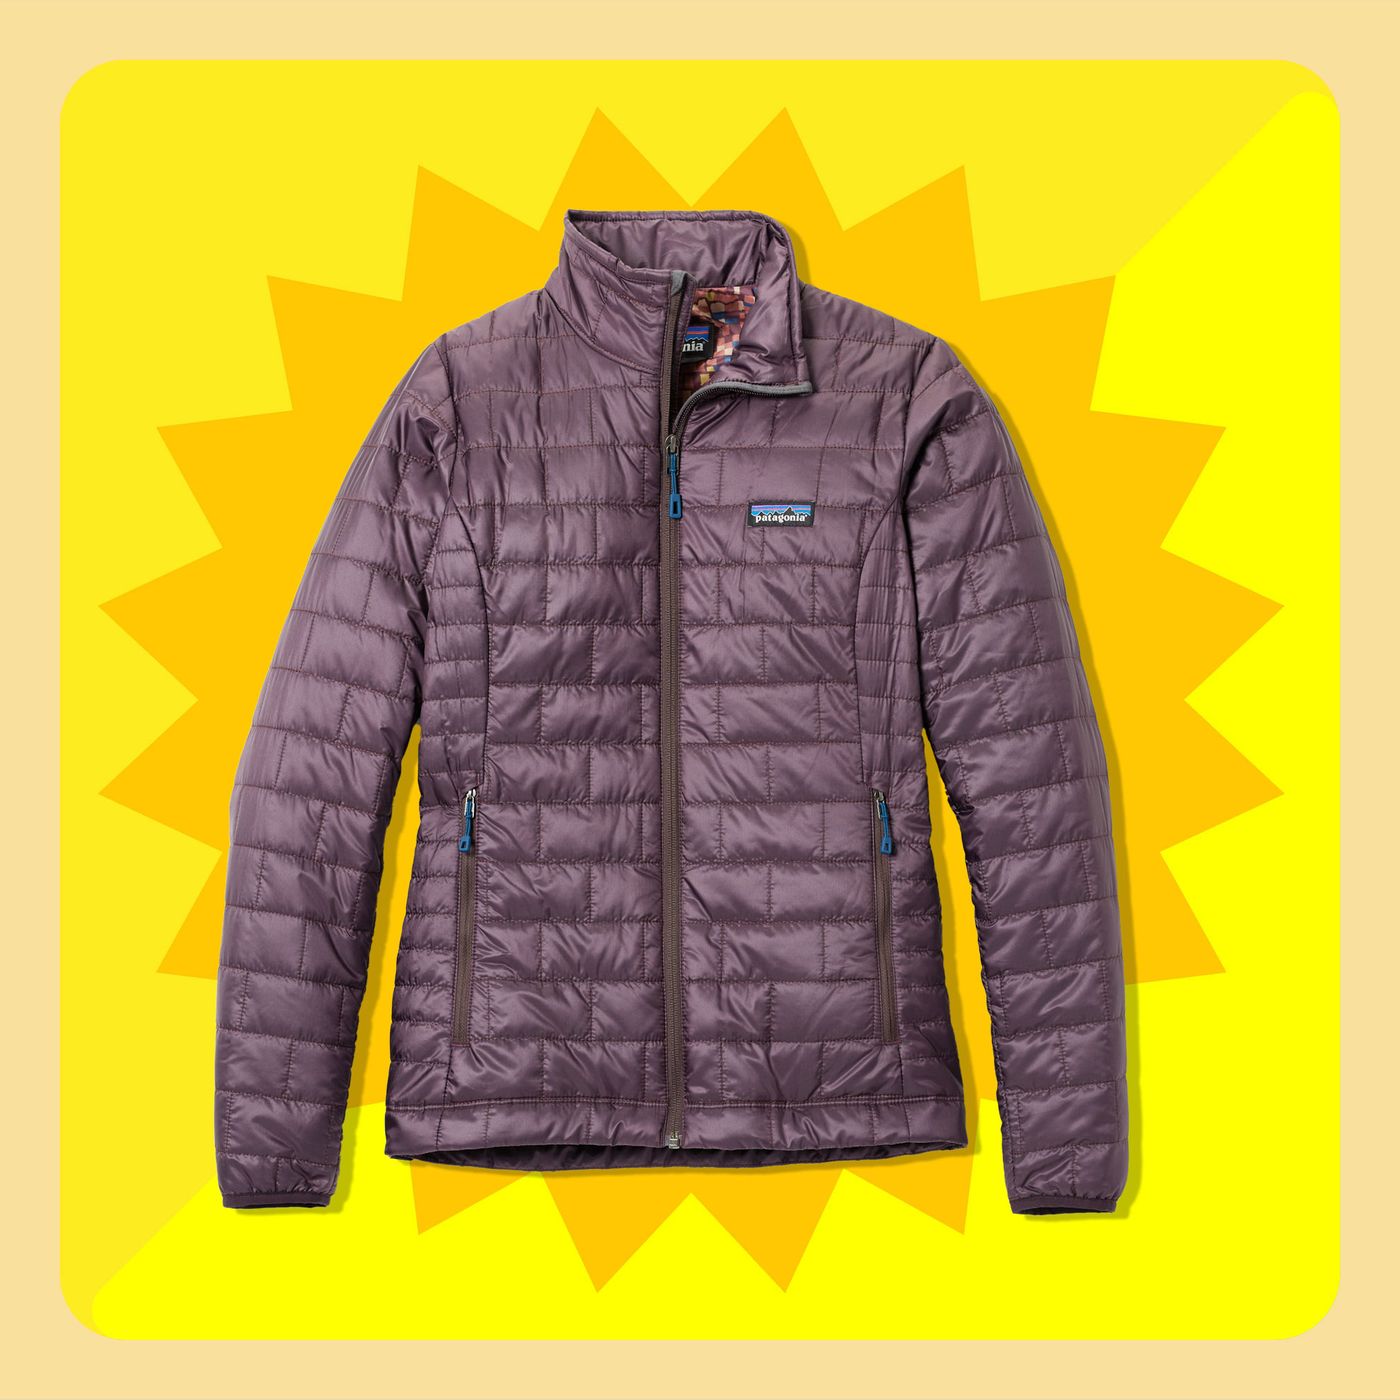 Patagonia's Nano Puff Jacket is on sale for 40% off